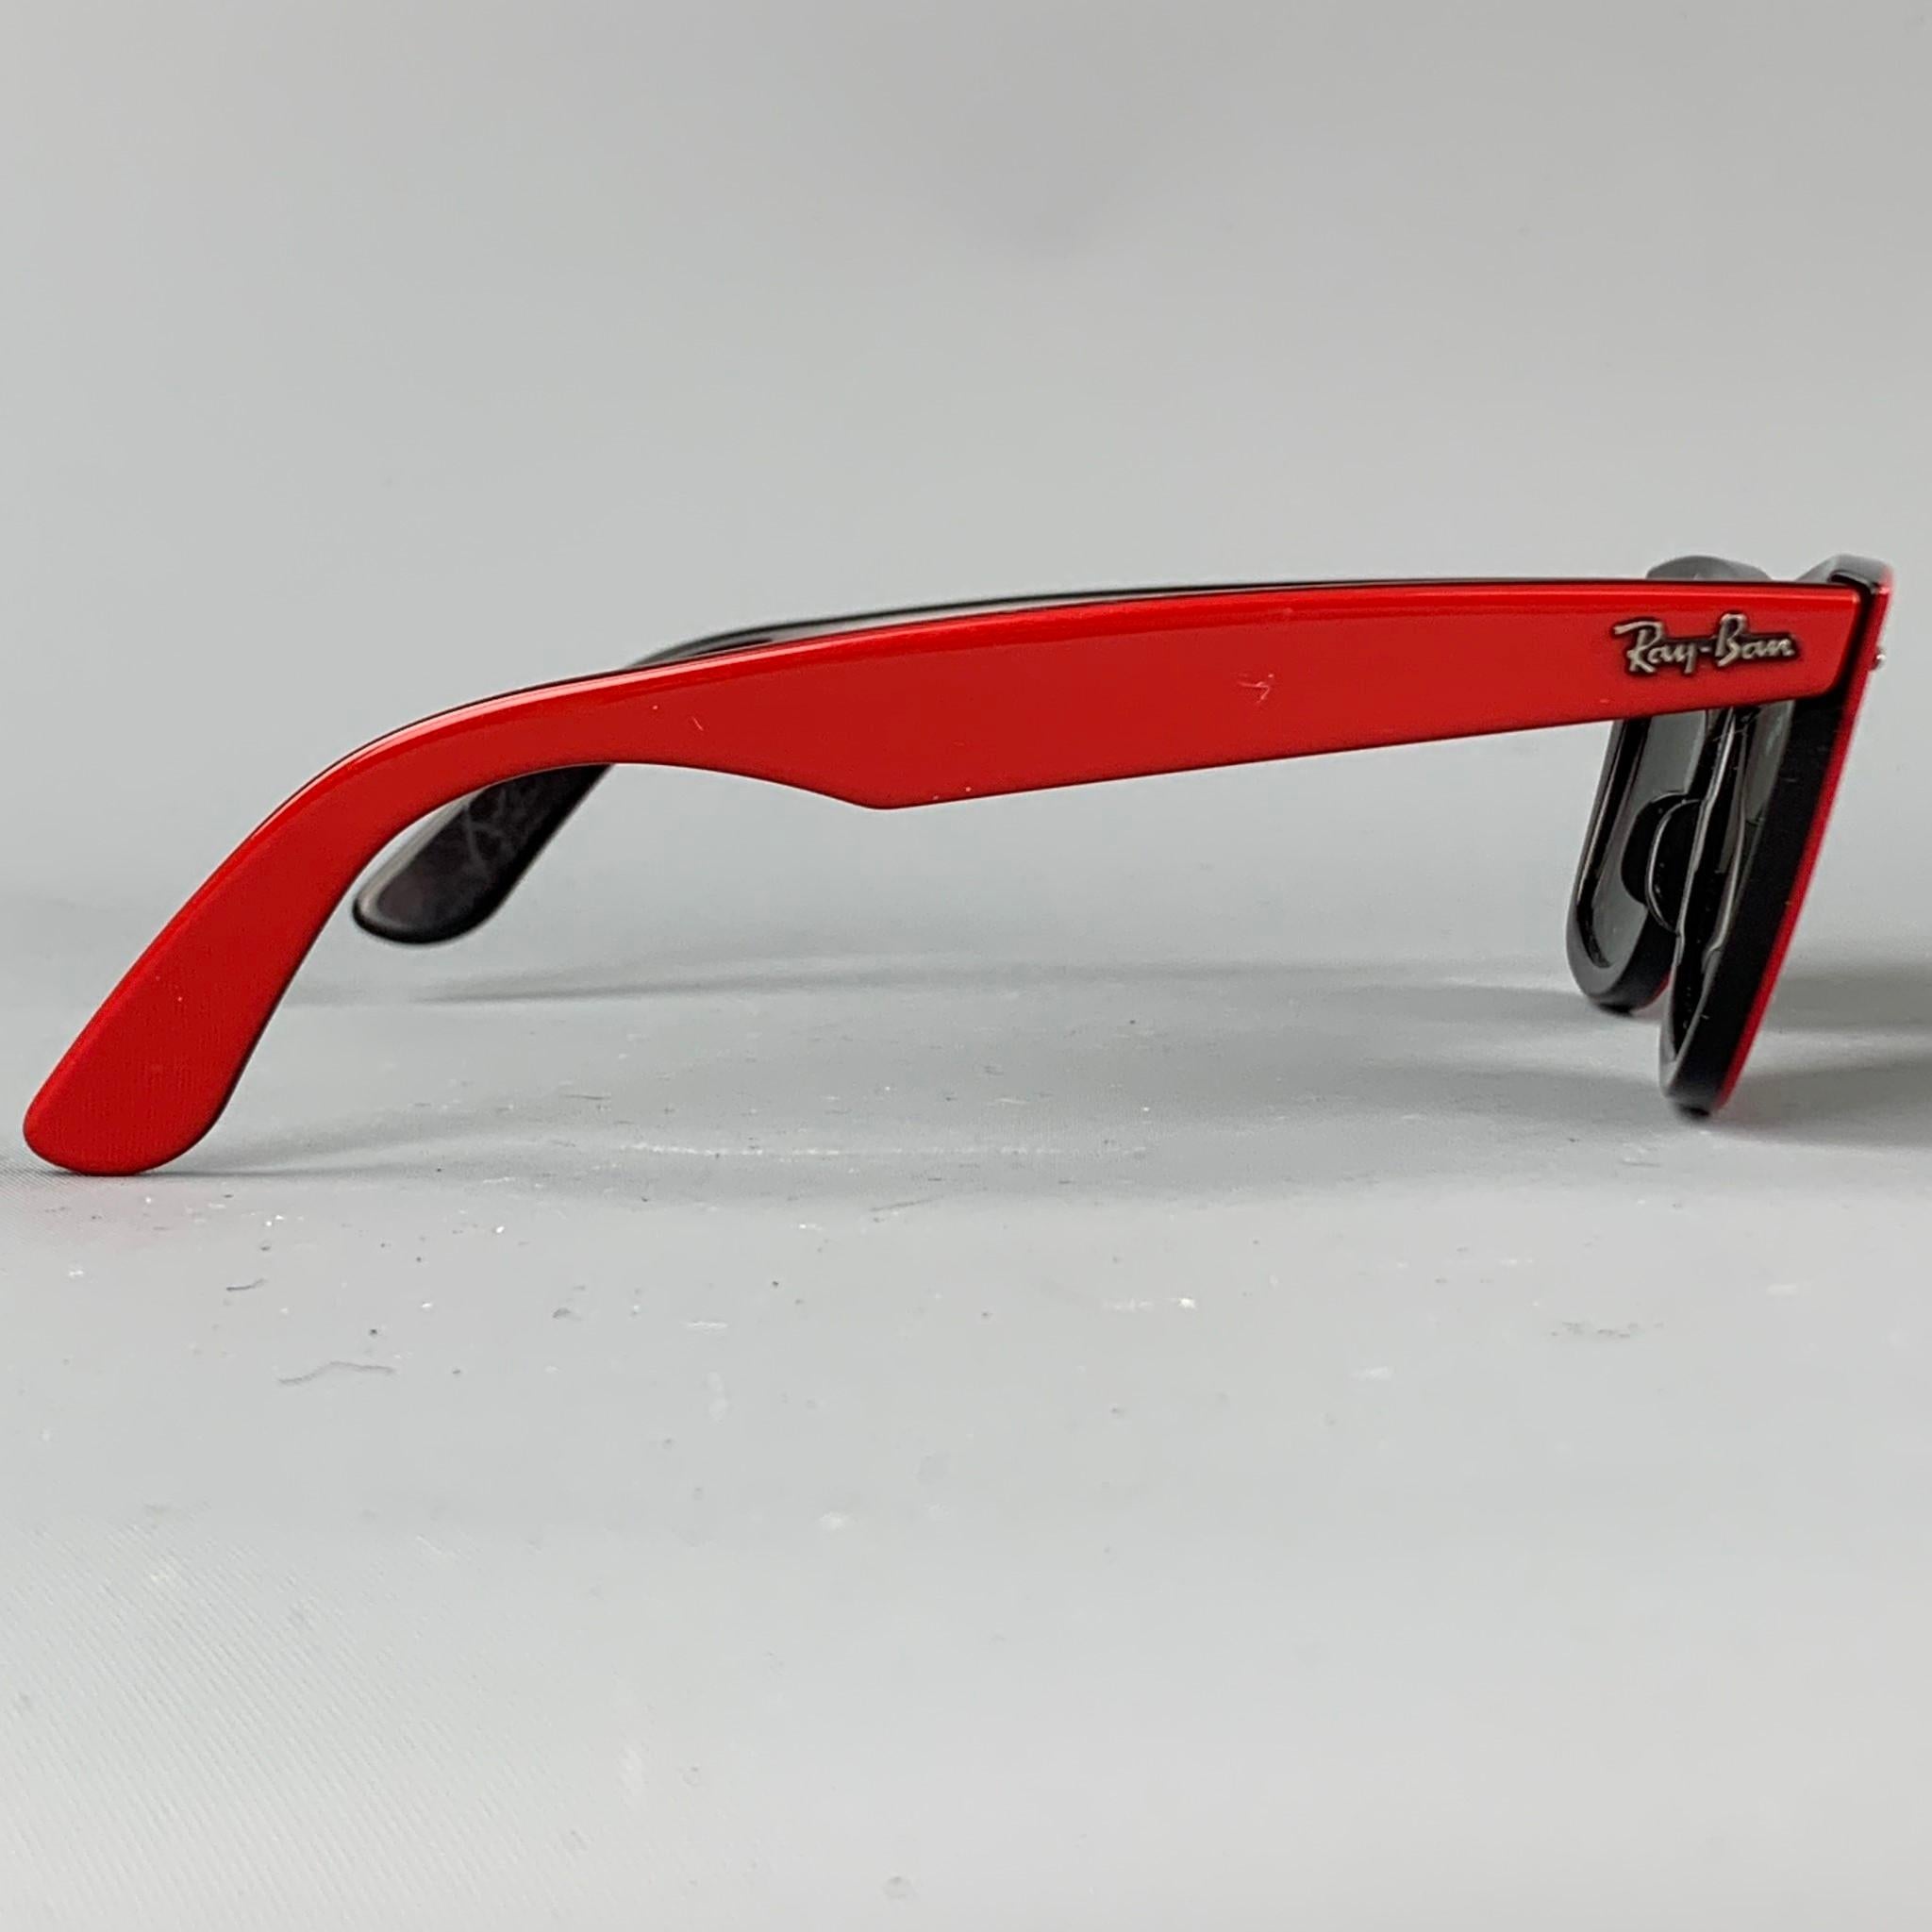 Vintage RAY-BAN sunglasses comes in a red acetate featuring a wayfarer style and black tinted lens. Comes with case. Hand made in Italy.

Very Good Pre-Owned Condition.
Marked: RB2140 955 50-22 3N

Measurements:

Length: 14 cm.
Height: 4.5 cm. 